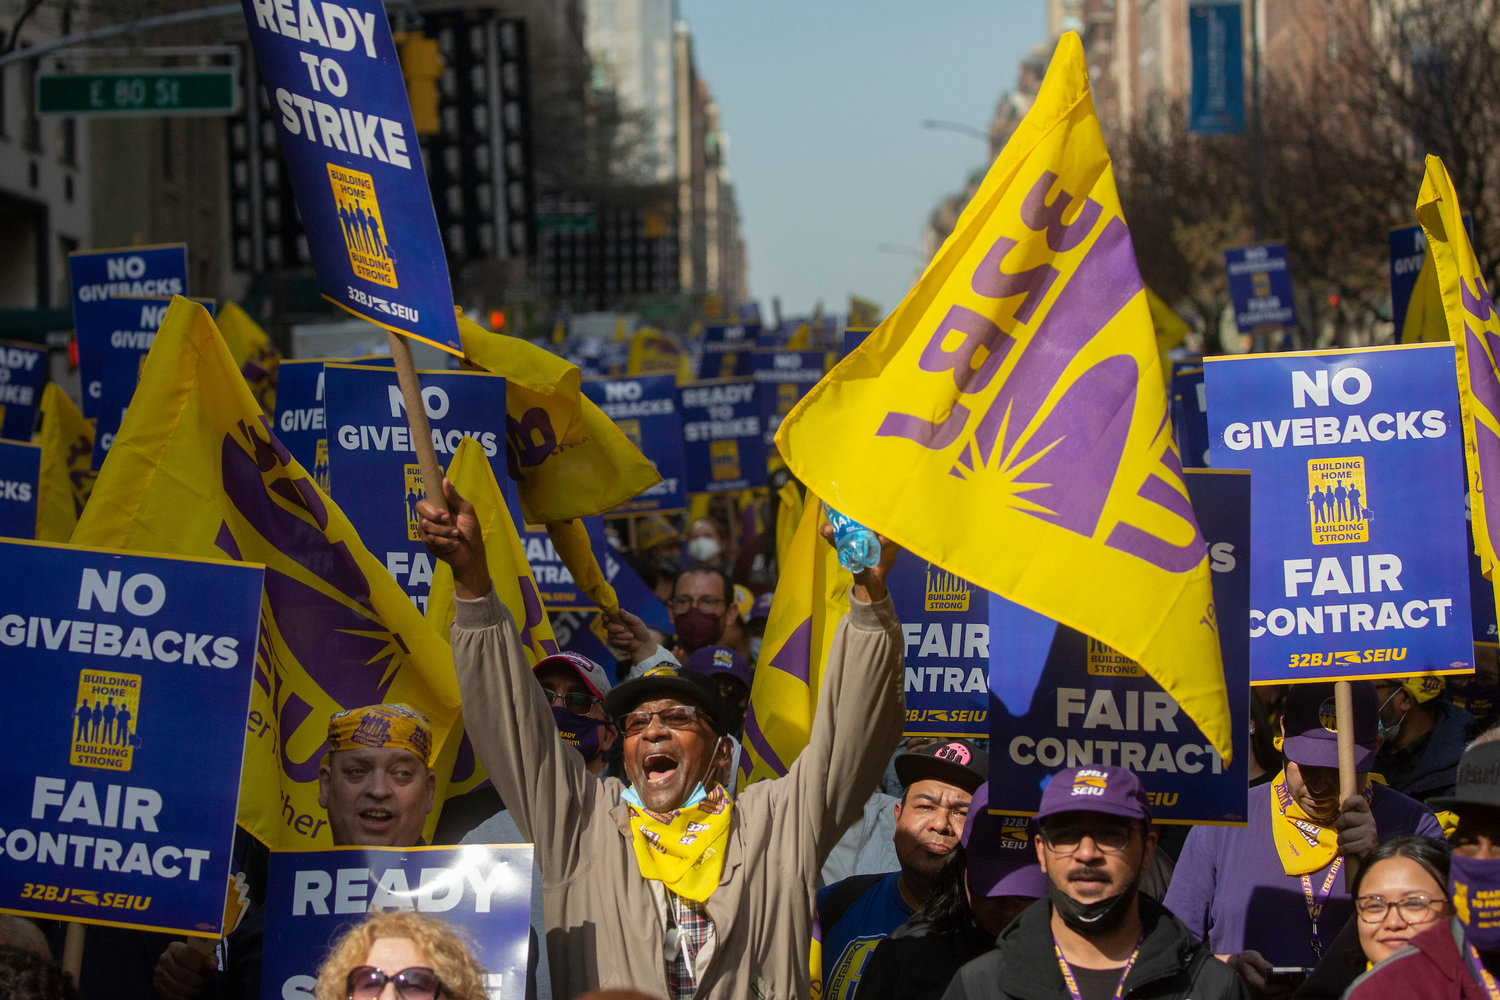 Should the city’s 32,000 doorpersons, porters, supers, concierges and other employees of 32BJ SEIU go on strike April 20, it would be building workers’ first in a generation. Above, some of the 10,000 who rallied in support of a new contract.